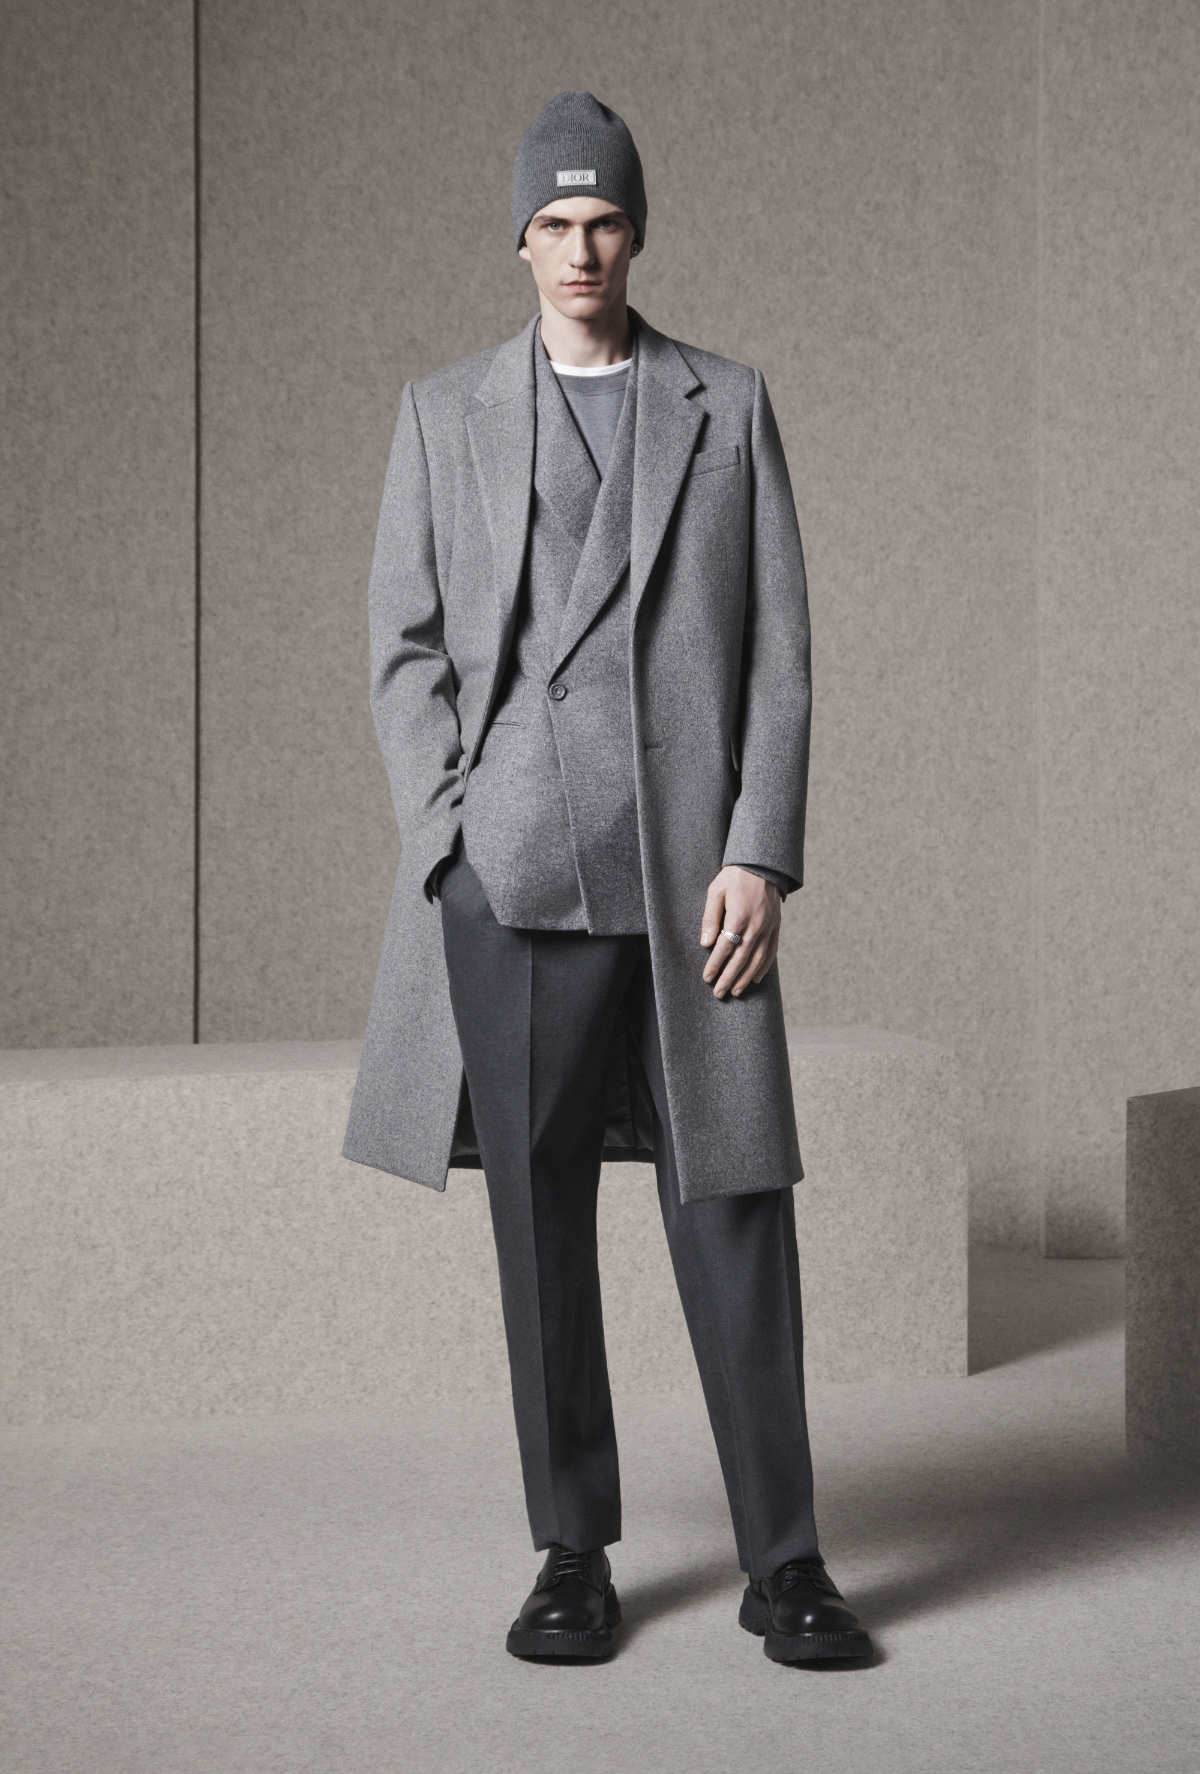 Dior Presents Its New Ready-to-Wear 2024 Menswear Capsule Collection - Dior Icons